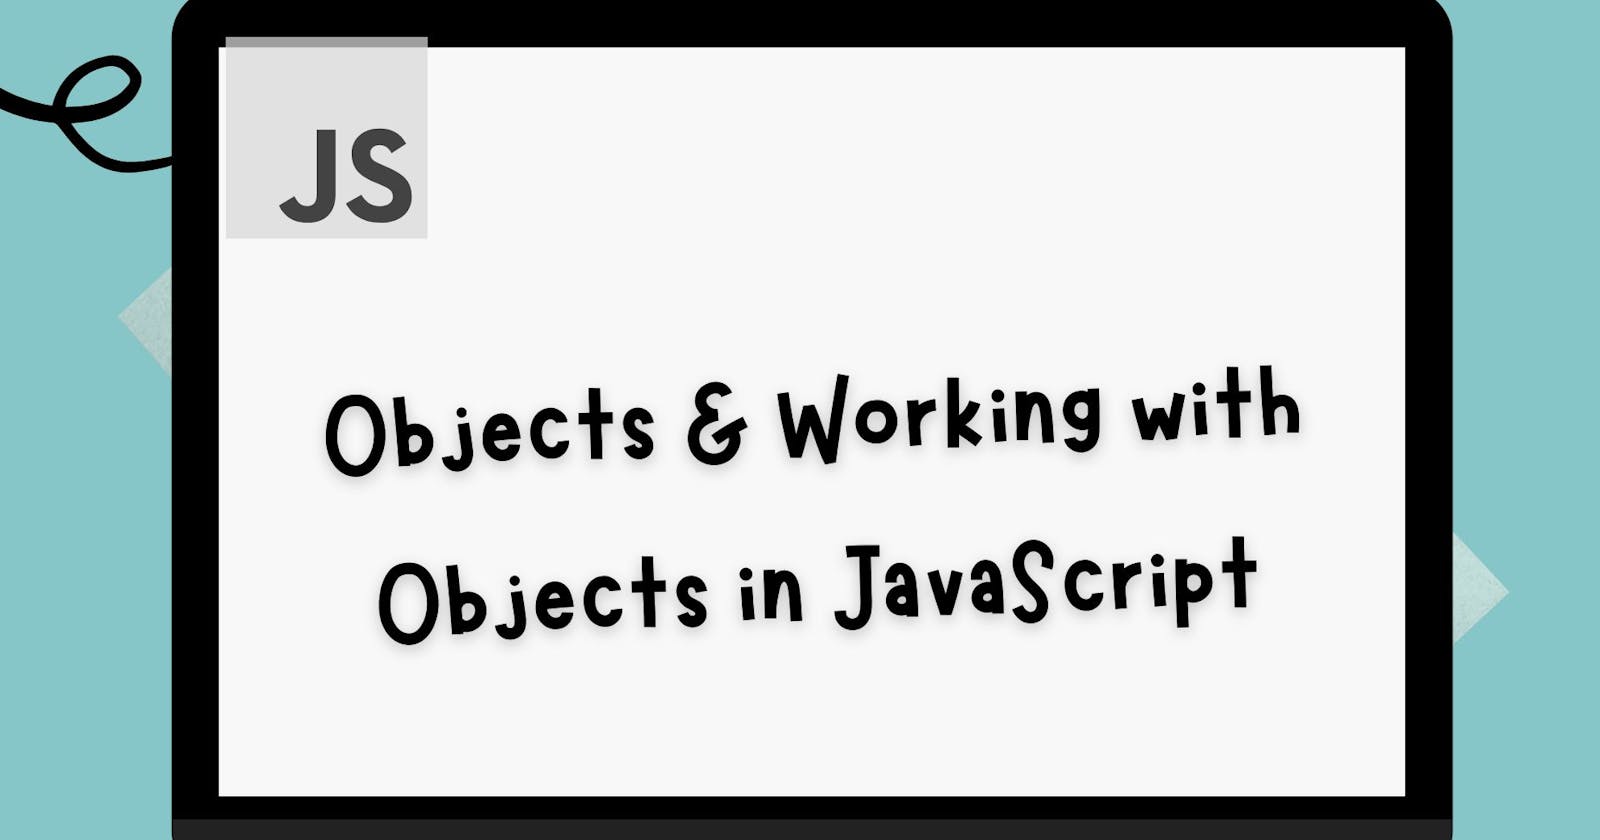 Objects & Working with Objects in JavaScript